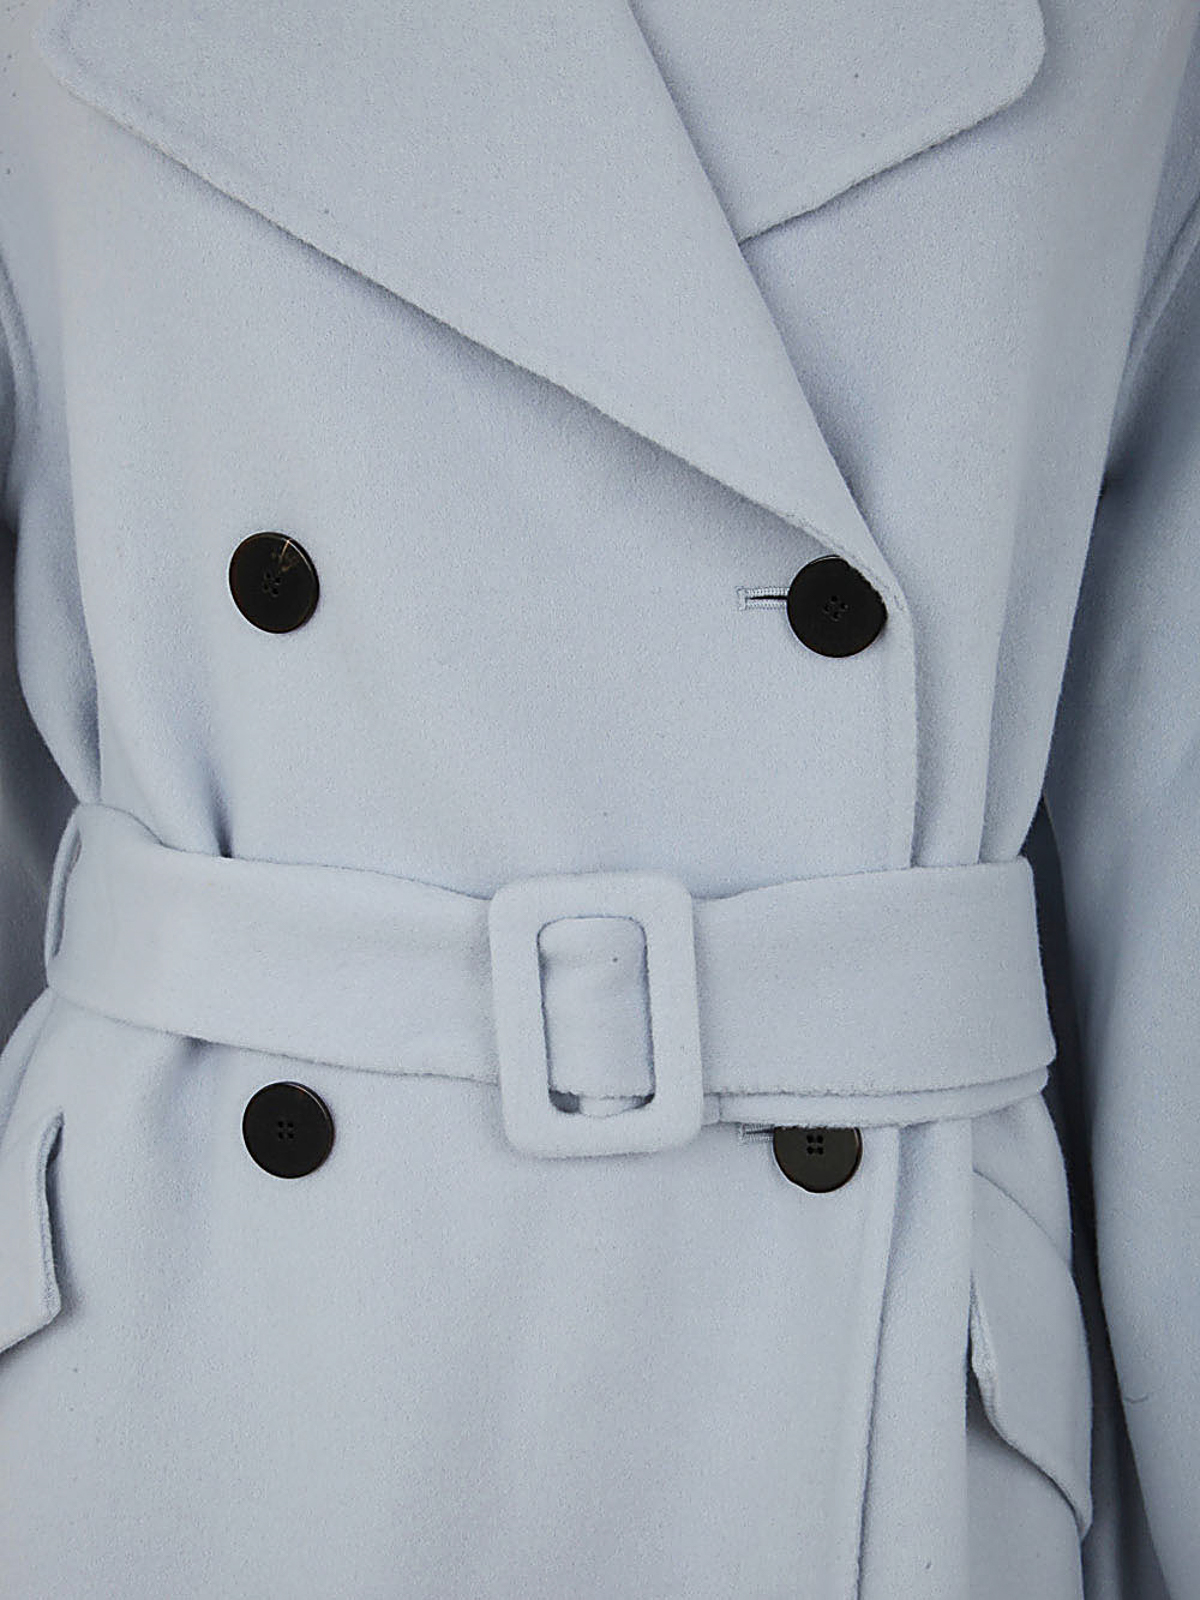 Theory Double-Breasted Belted Trench Coat